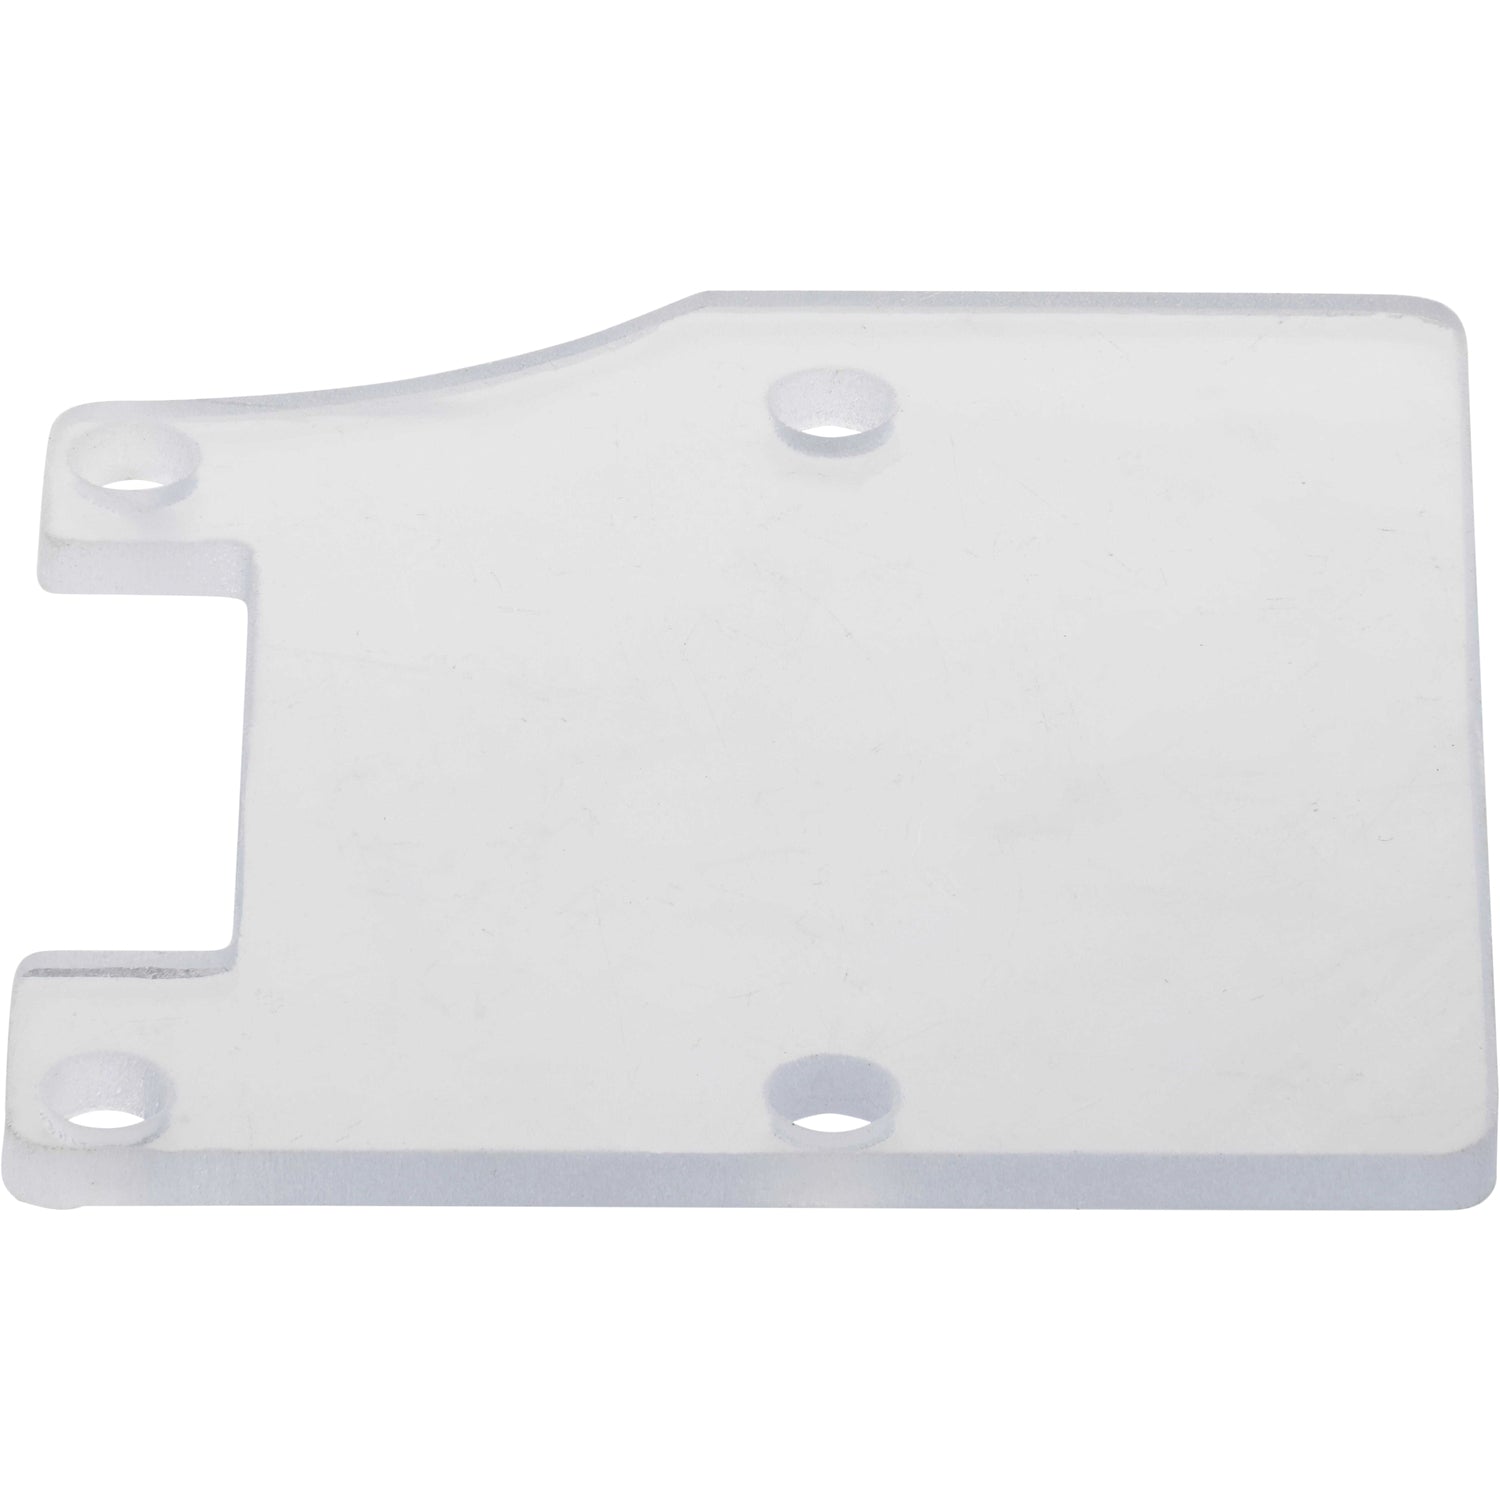 Small, rectangular, transparent polycarbonate guard with four mounting holes shown on white background.